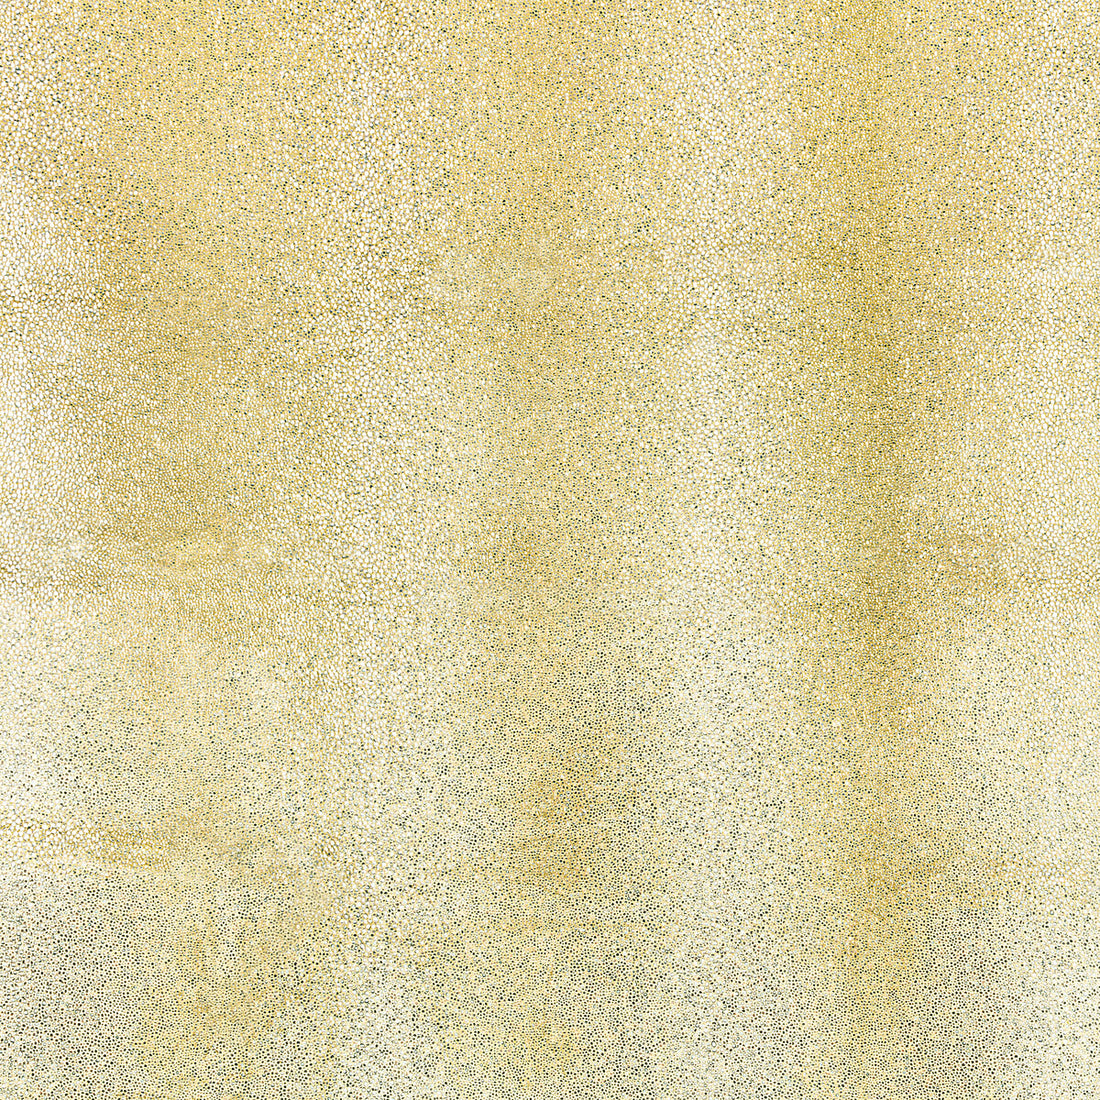 Kravet Couture fabric in 34031-4 color - pattern 34031.4.0 - by Kravet Couture